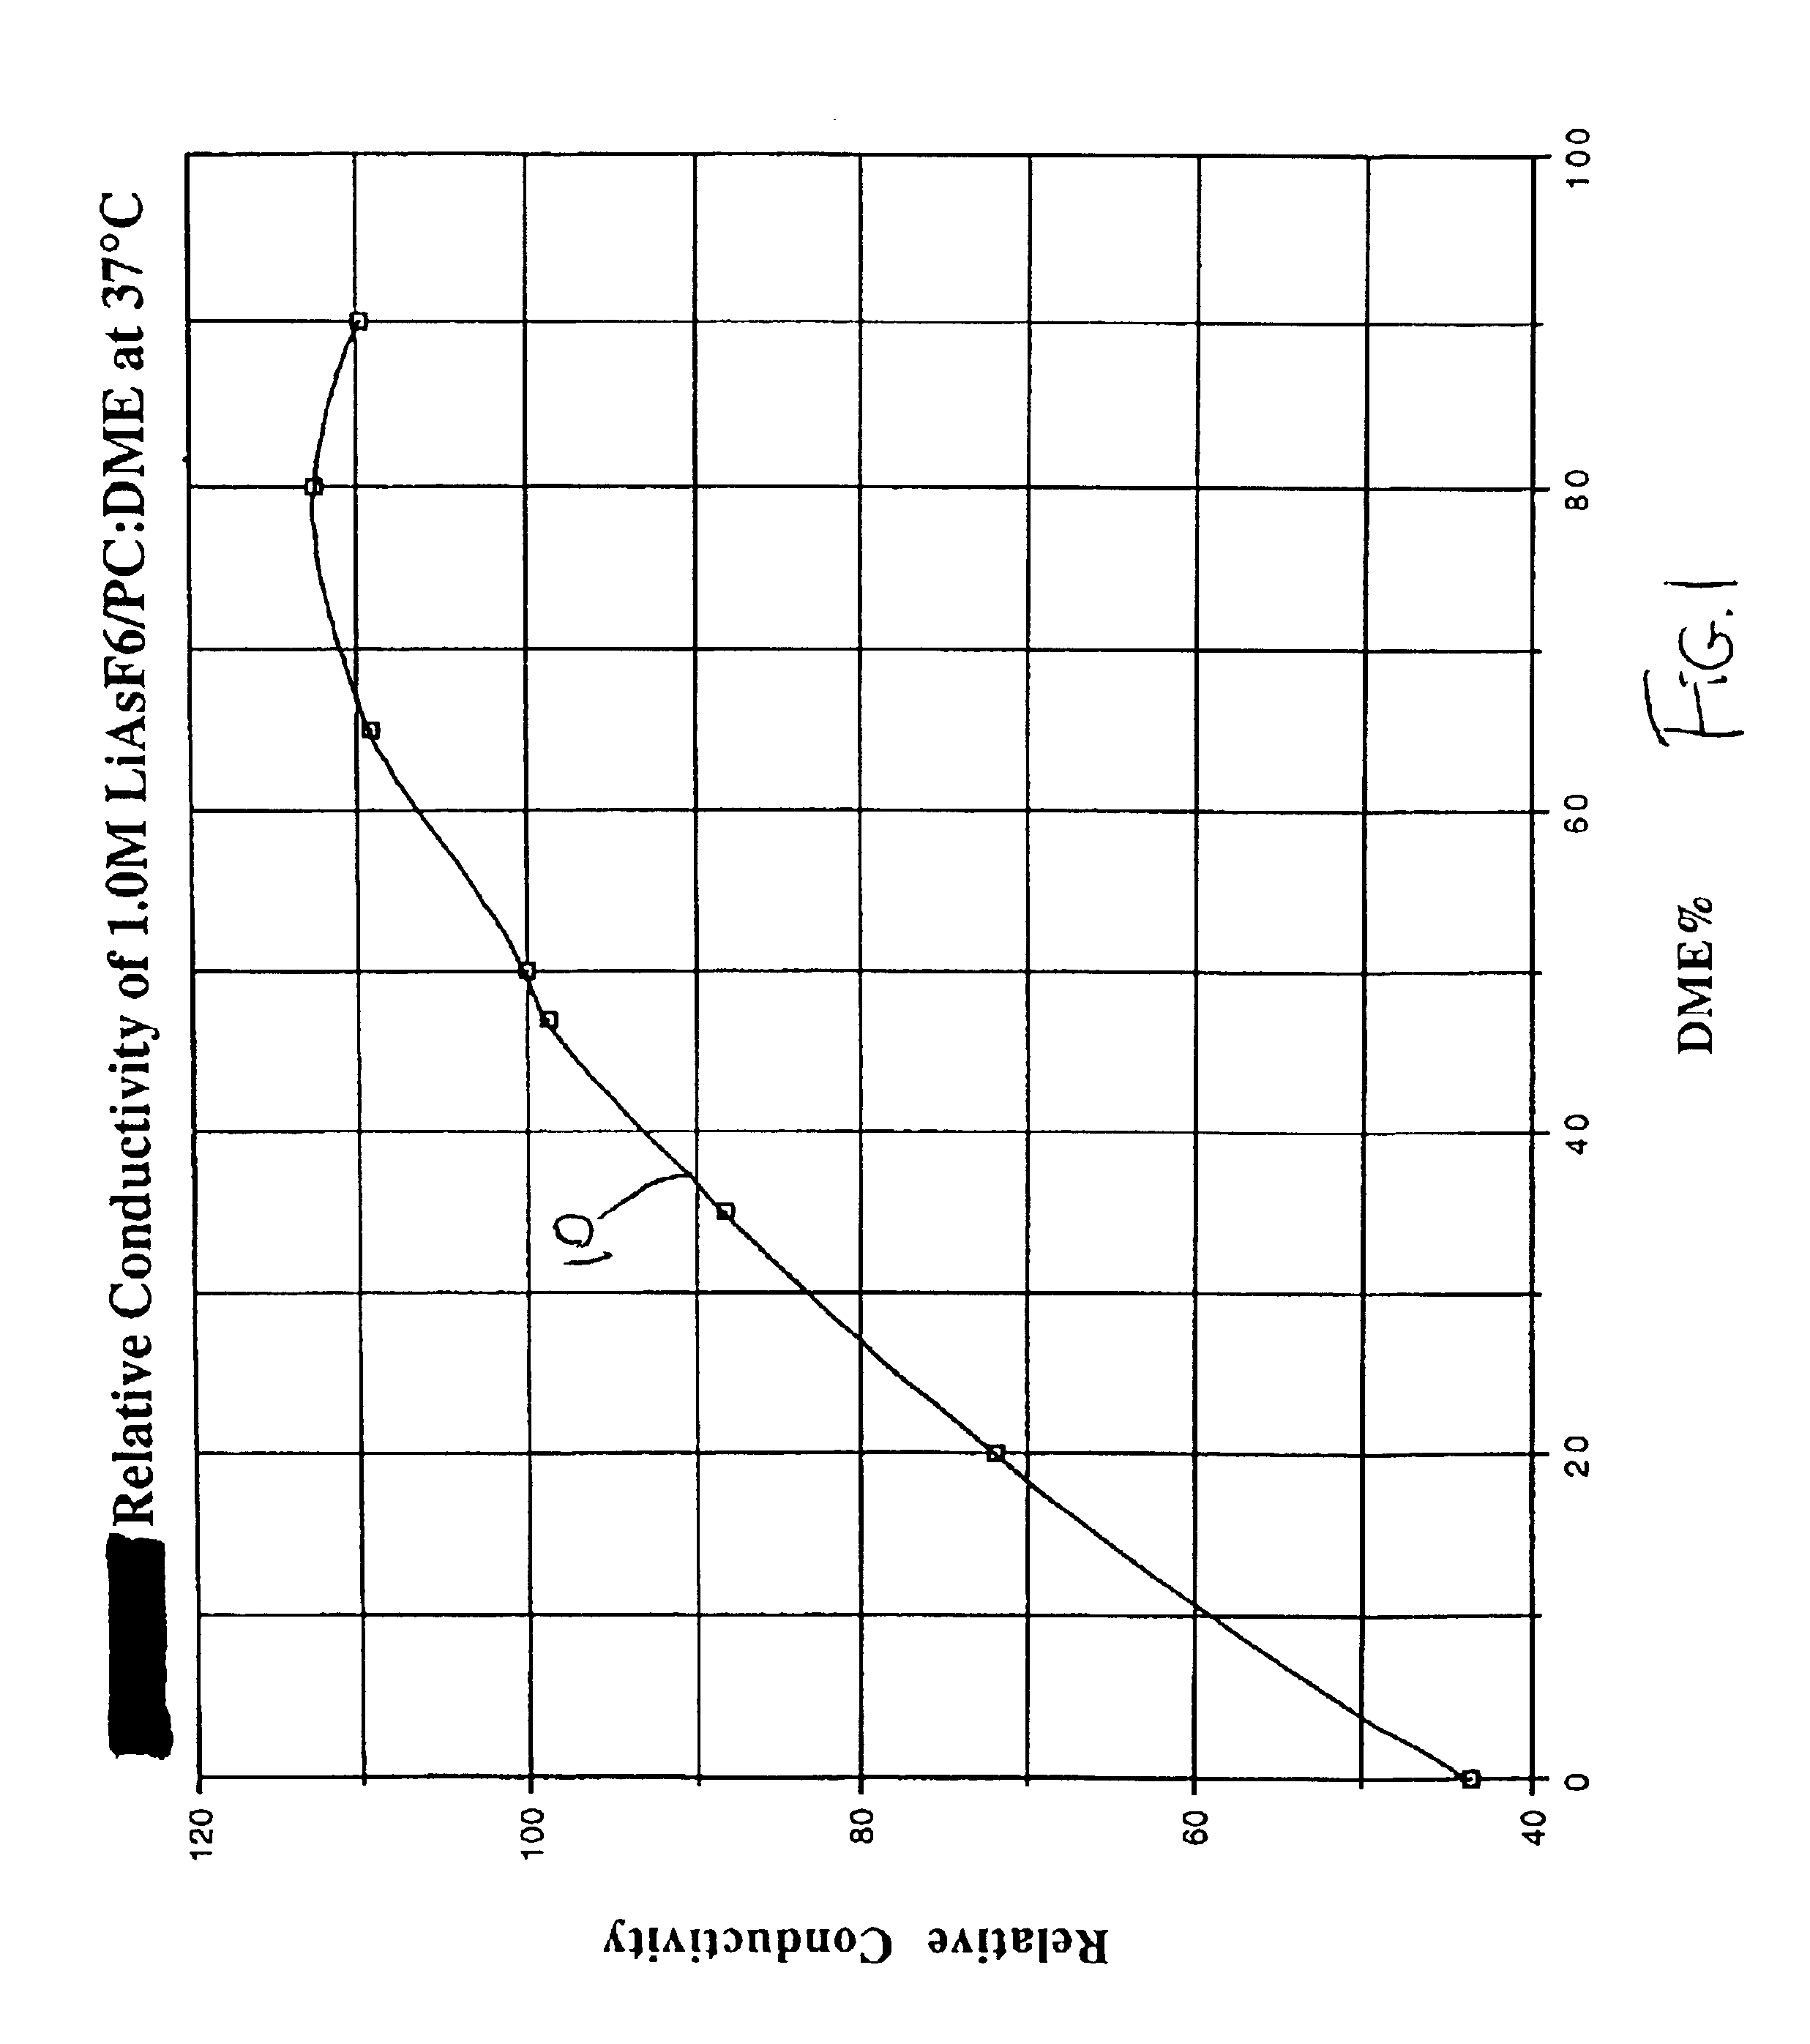 Highly conductive and stable nonaqueous electrolyte for lithium electrochemical cells